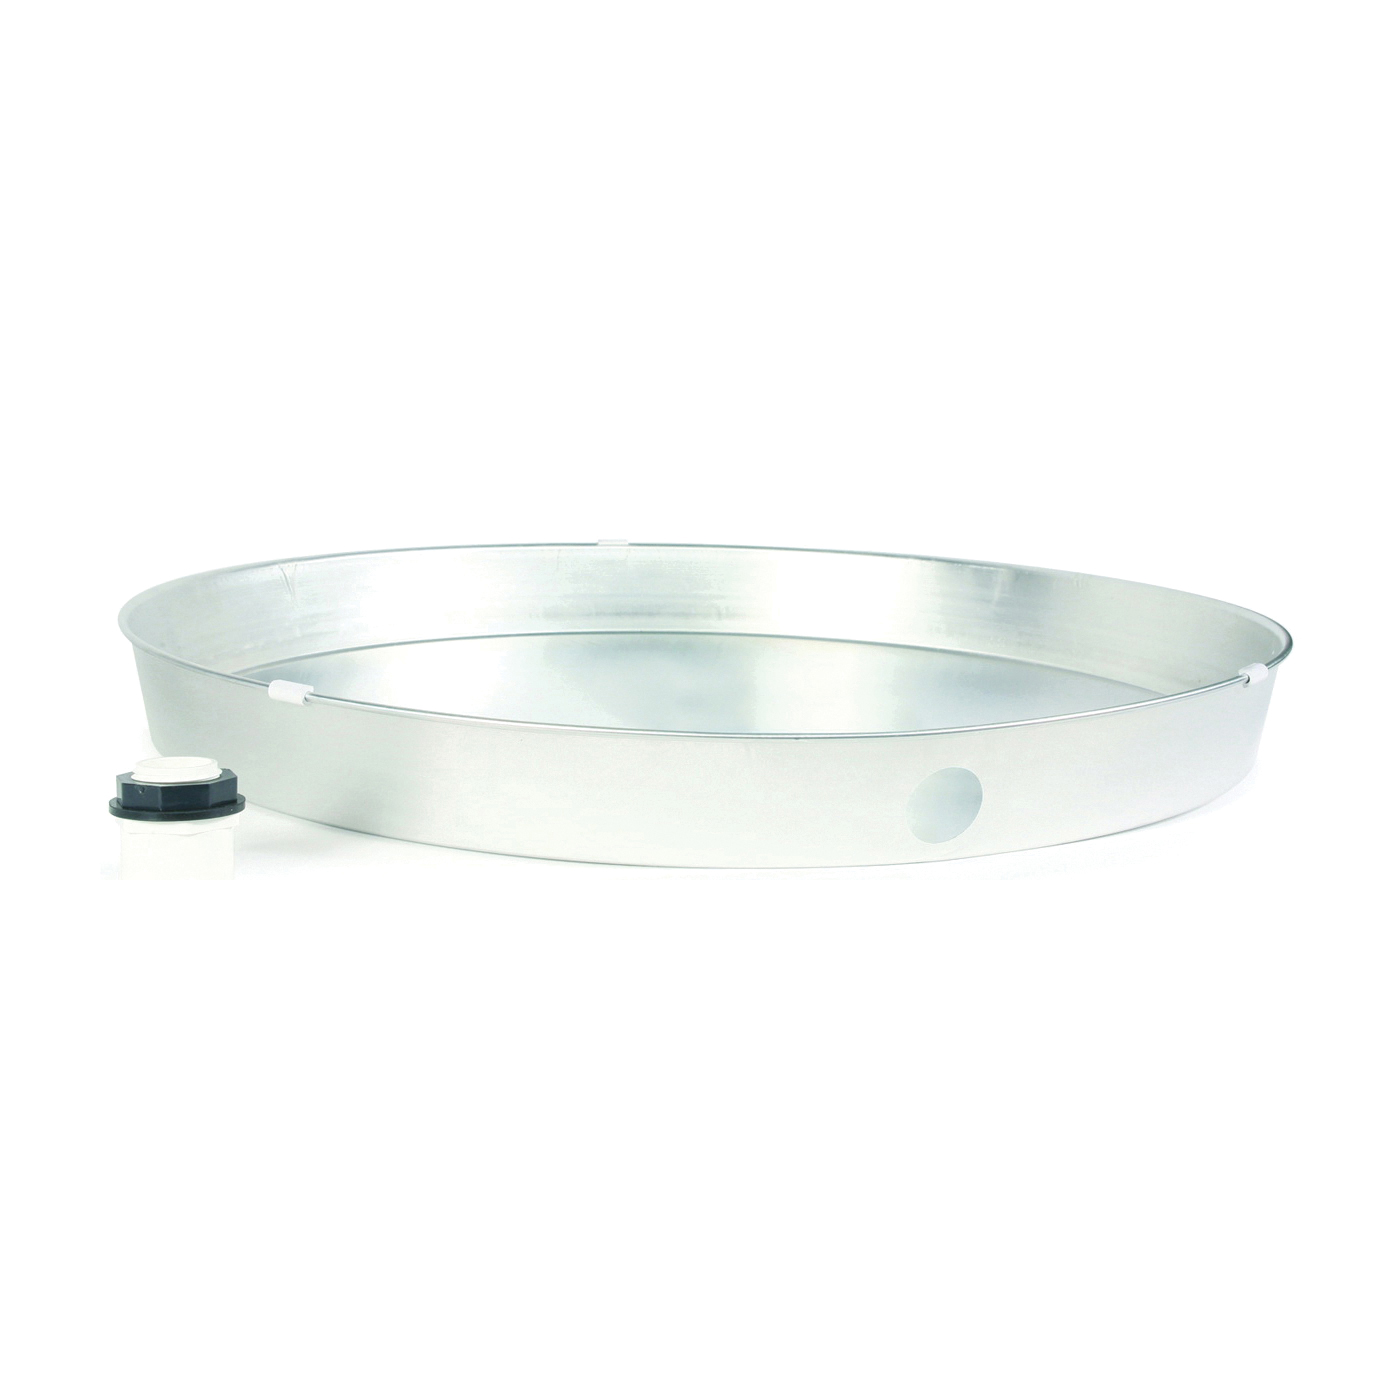 20810 Recyclable Drain Pan, Aluminum, For: Gas or Electric Water Heaters